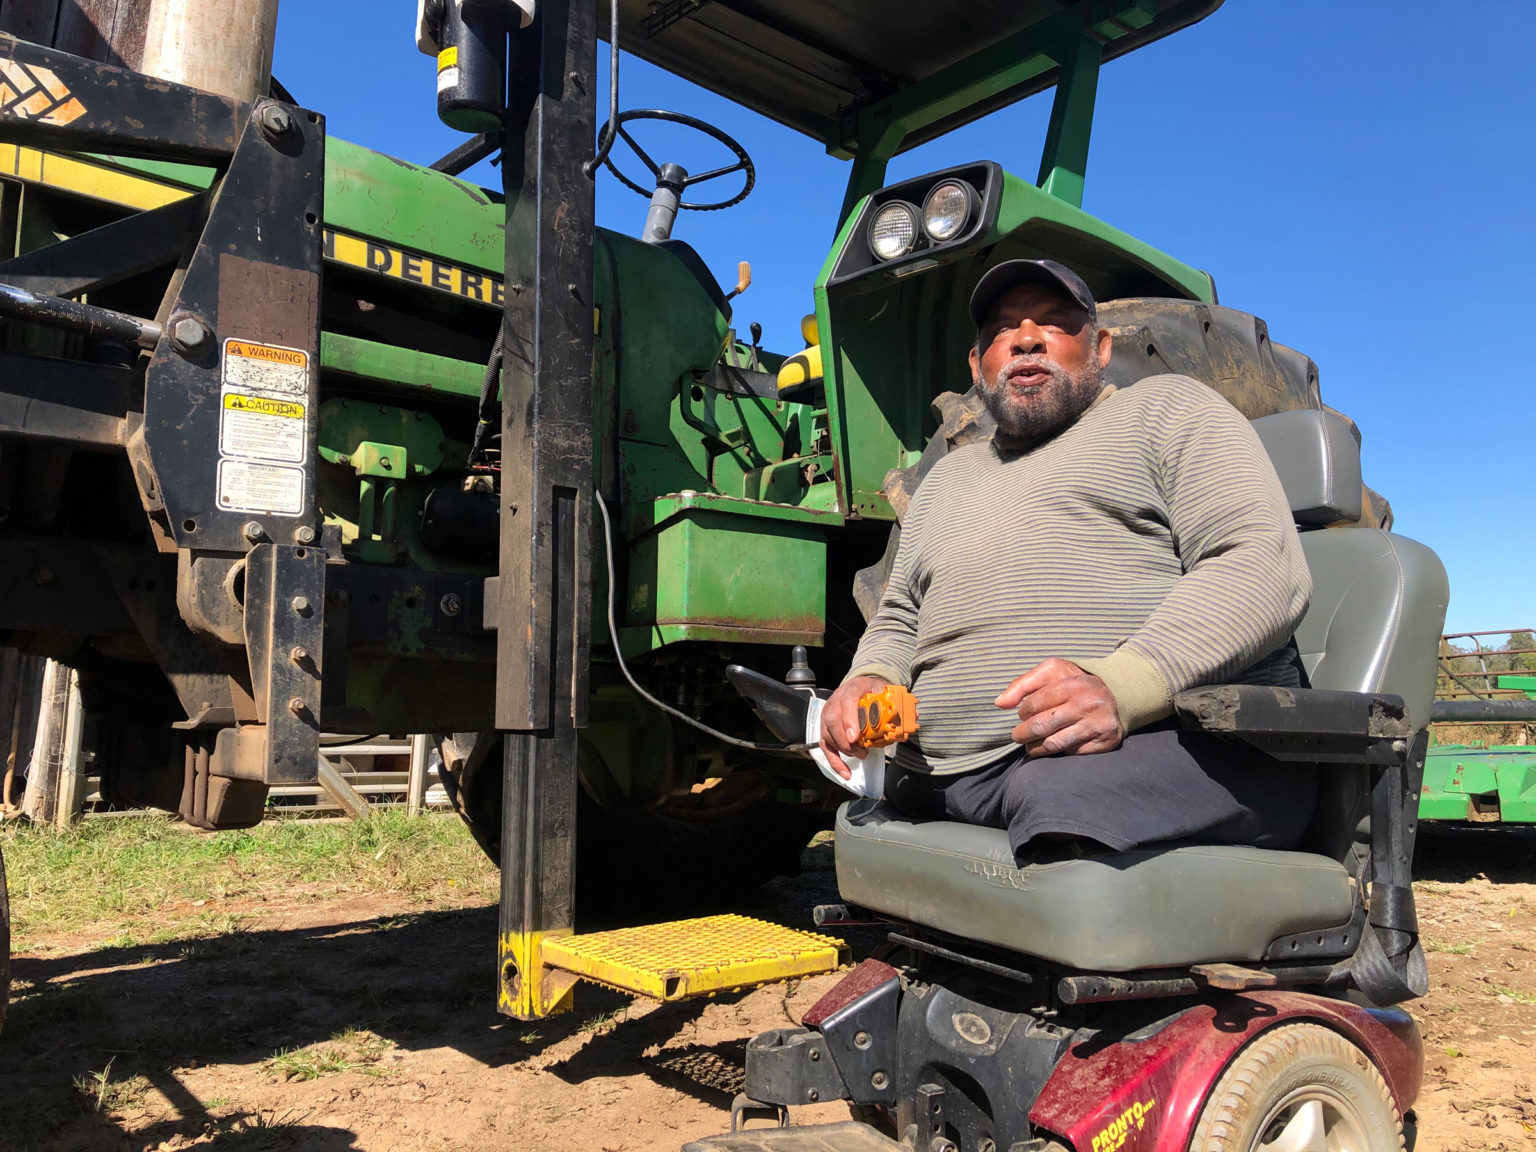 A senior Black man with an electric wheelchair next to his John Deere tractor